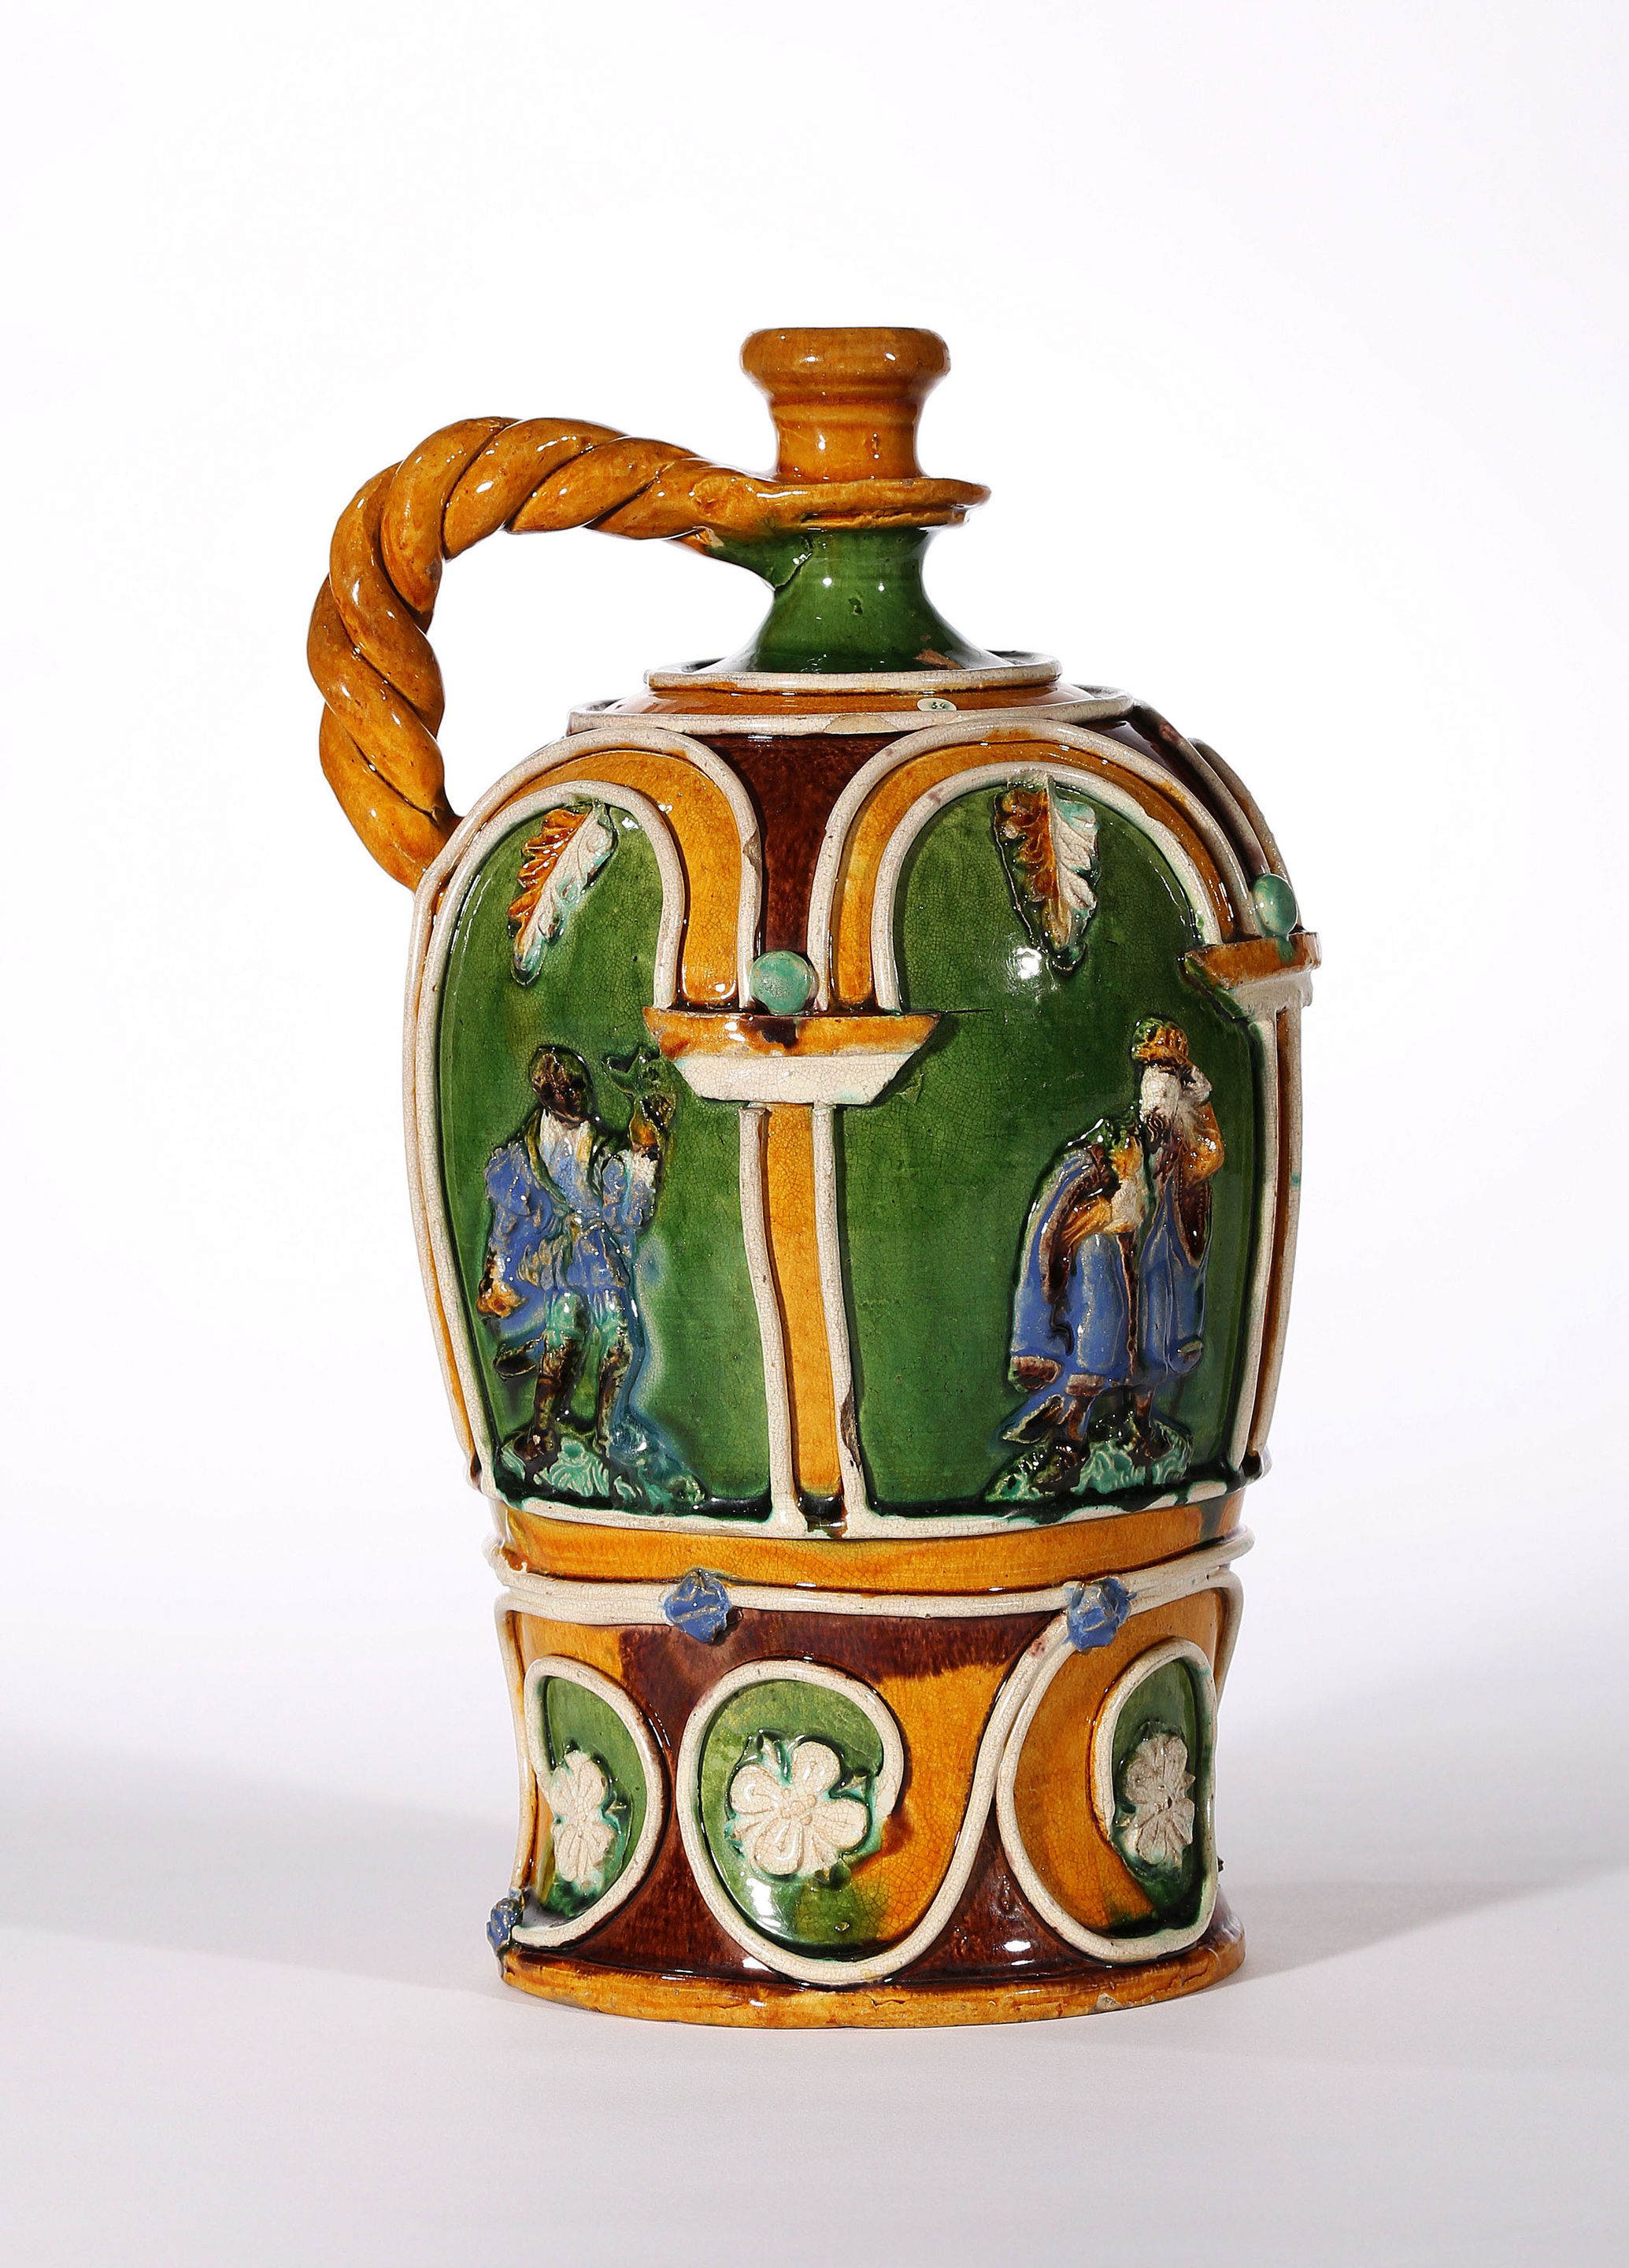 Hafnerware Flask with The Adoration of the Magi, Workshop of Paul Preuning